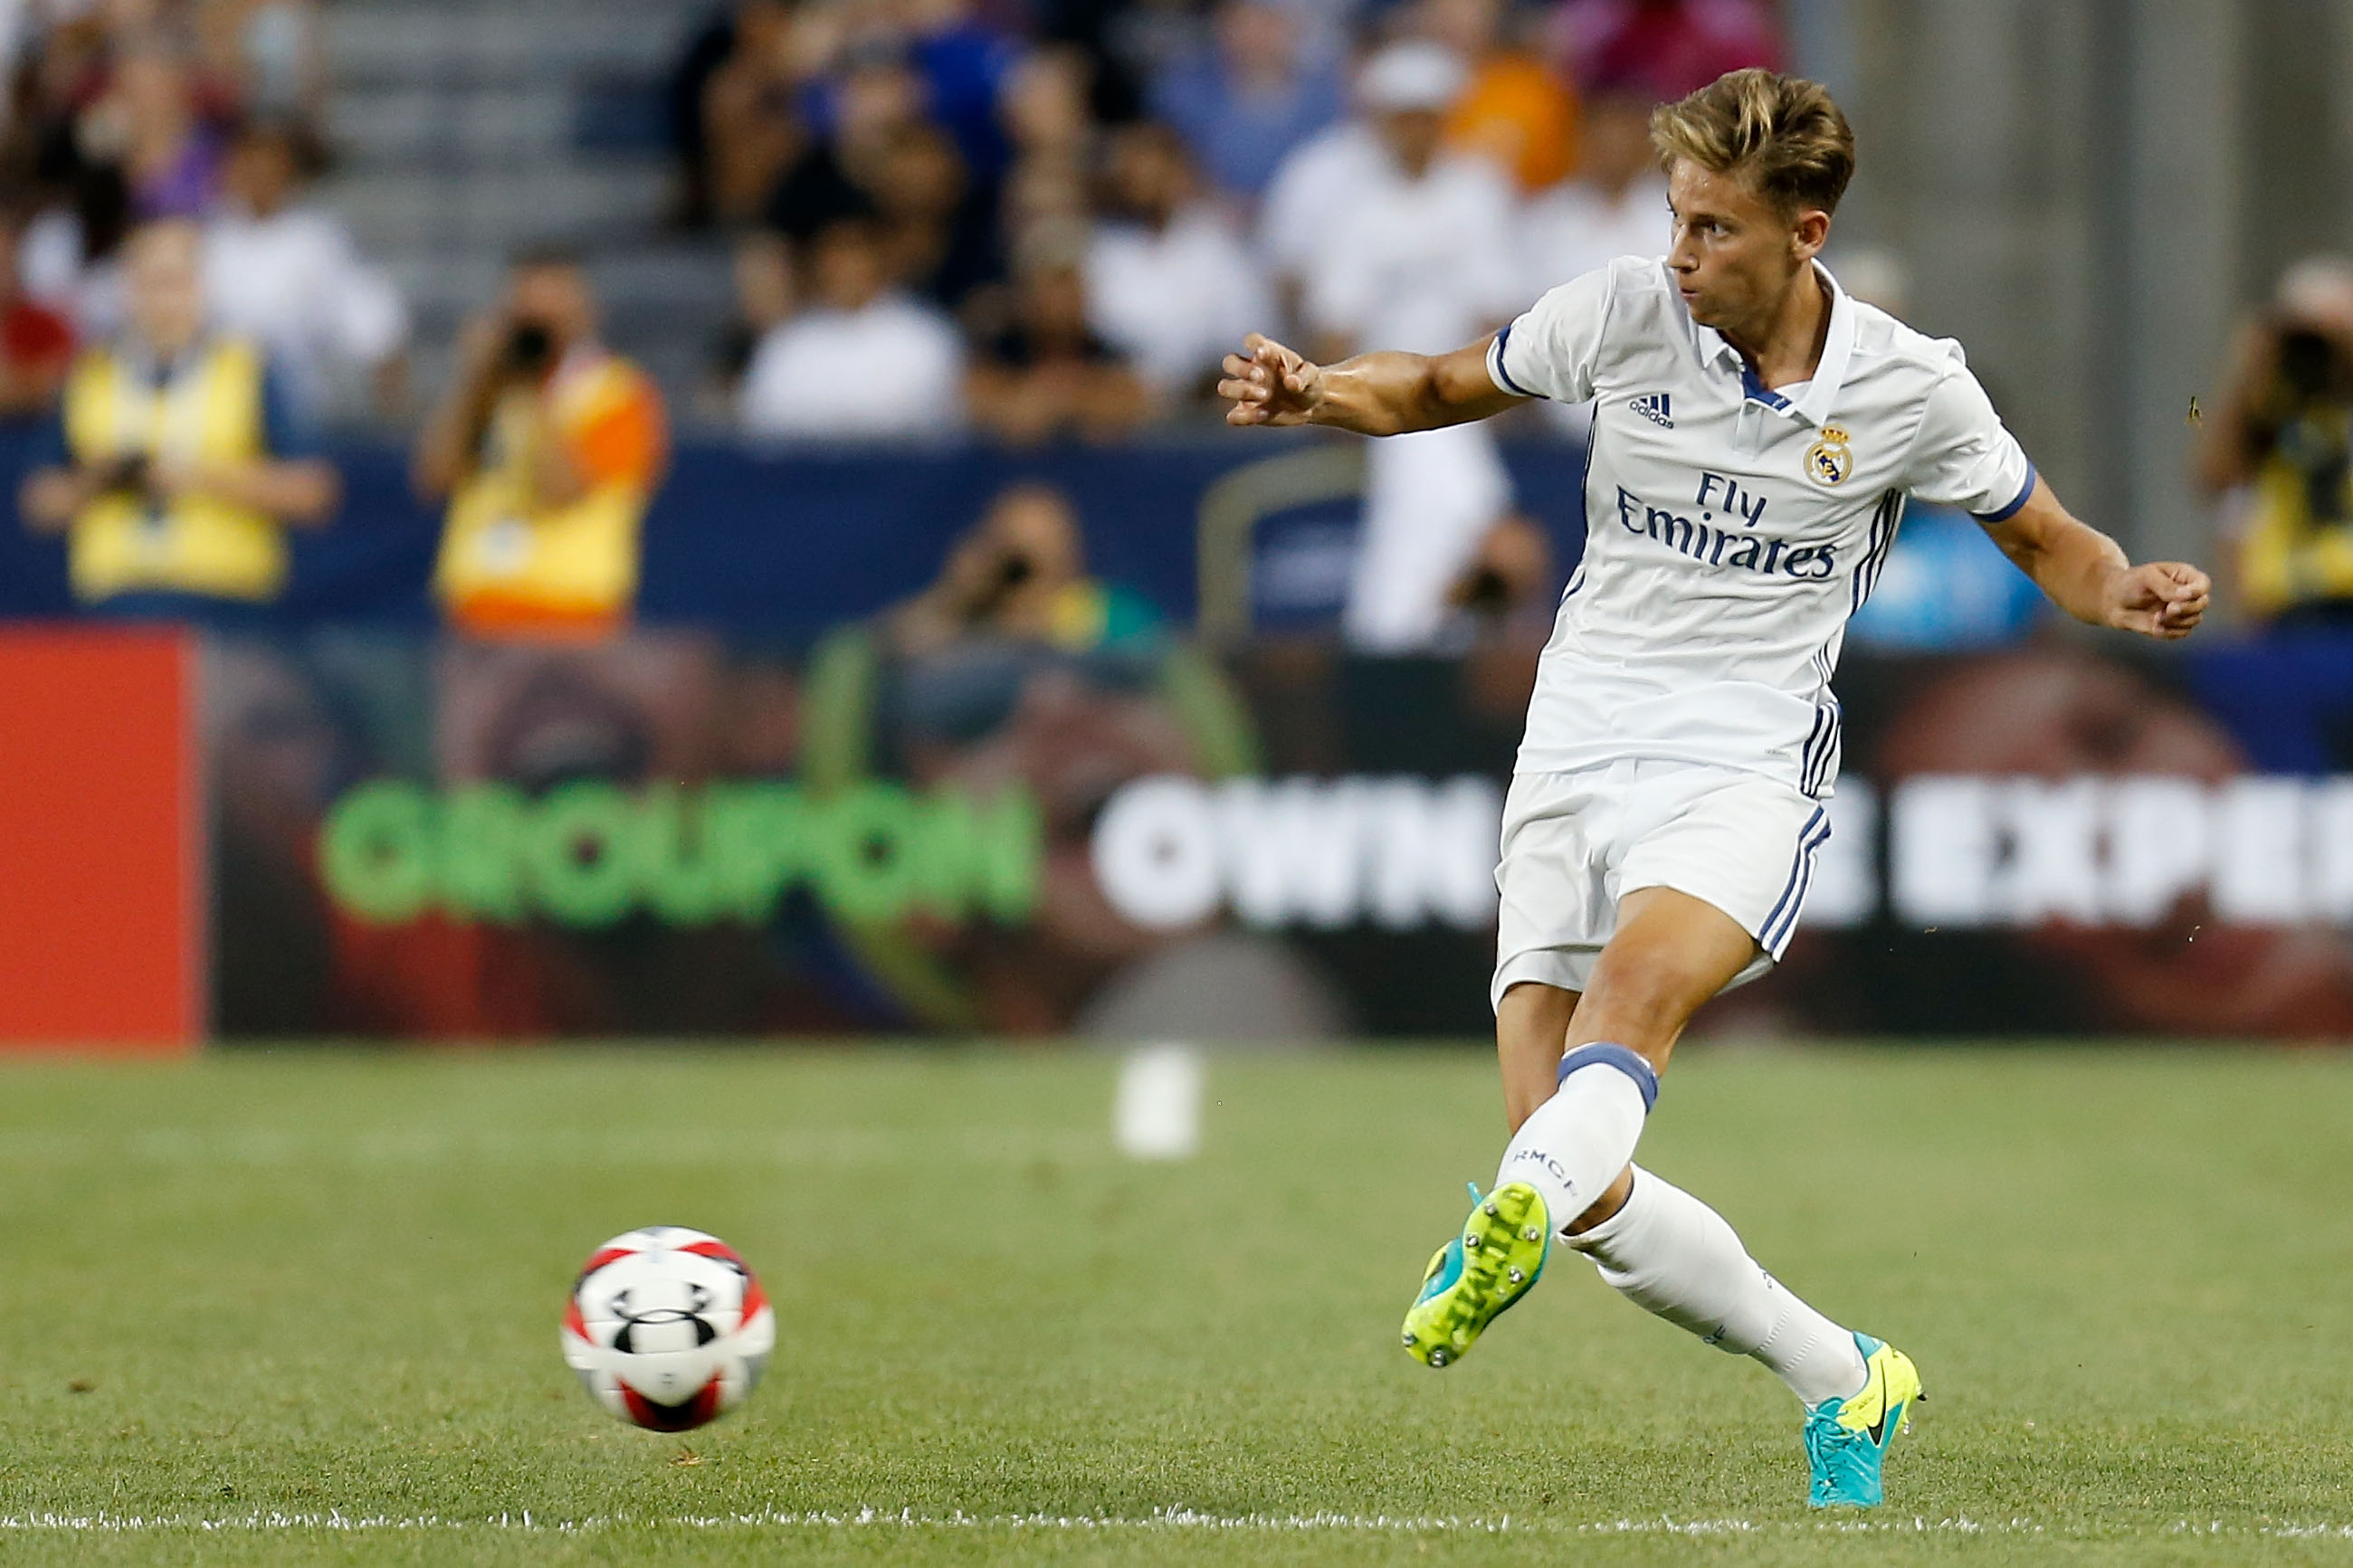 COLUMBUS, OH - JULY 27:  Marcos Llorente #27 of Real Madrid C.F. controls the ball during the game against Paris Saint-Germain F.C. on July 27, 2016 at Ohio Stadium in Columbus, Ohio. Paris Saint-Germain F.C. defeated Real Madrid C.F. 3-1. (Photo by Kirk Irwin/Getty Images)